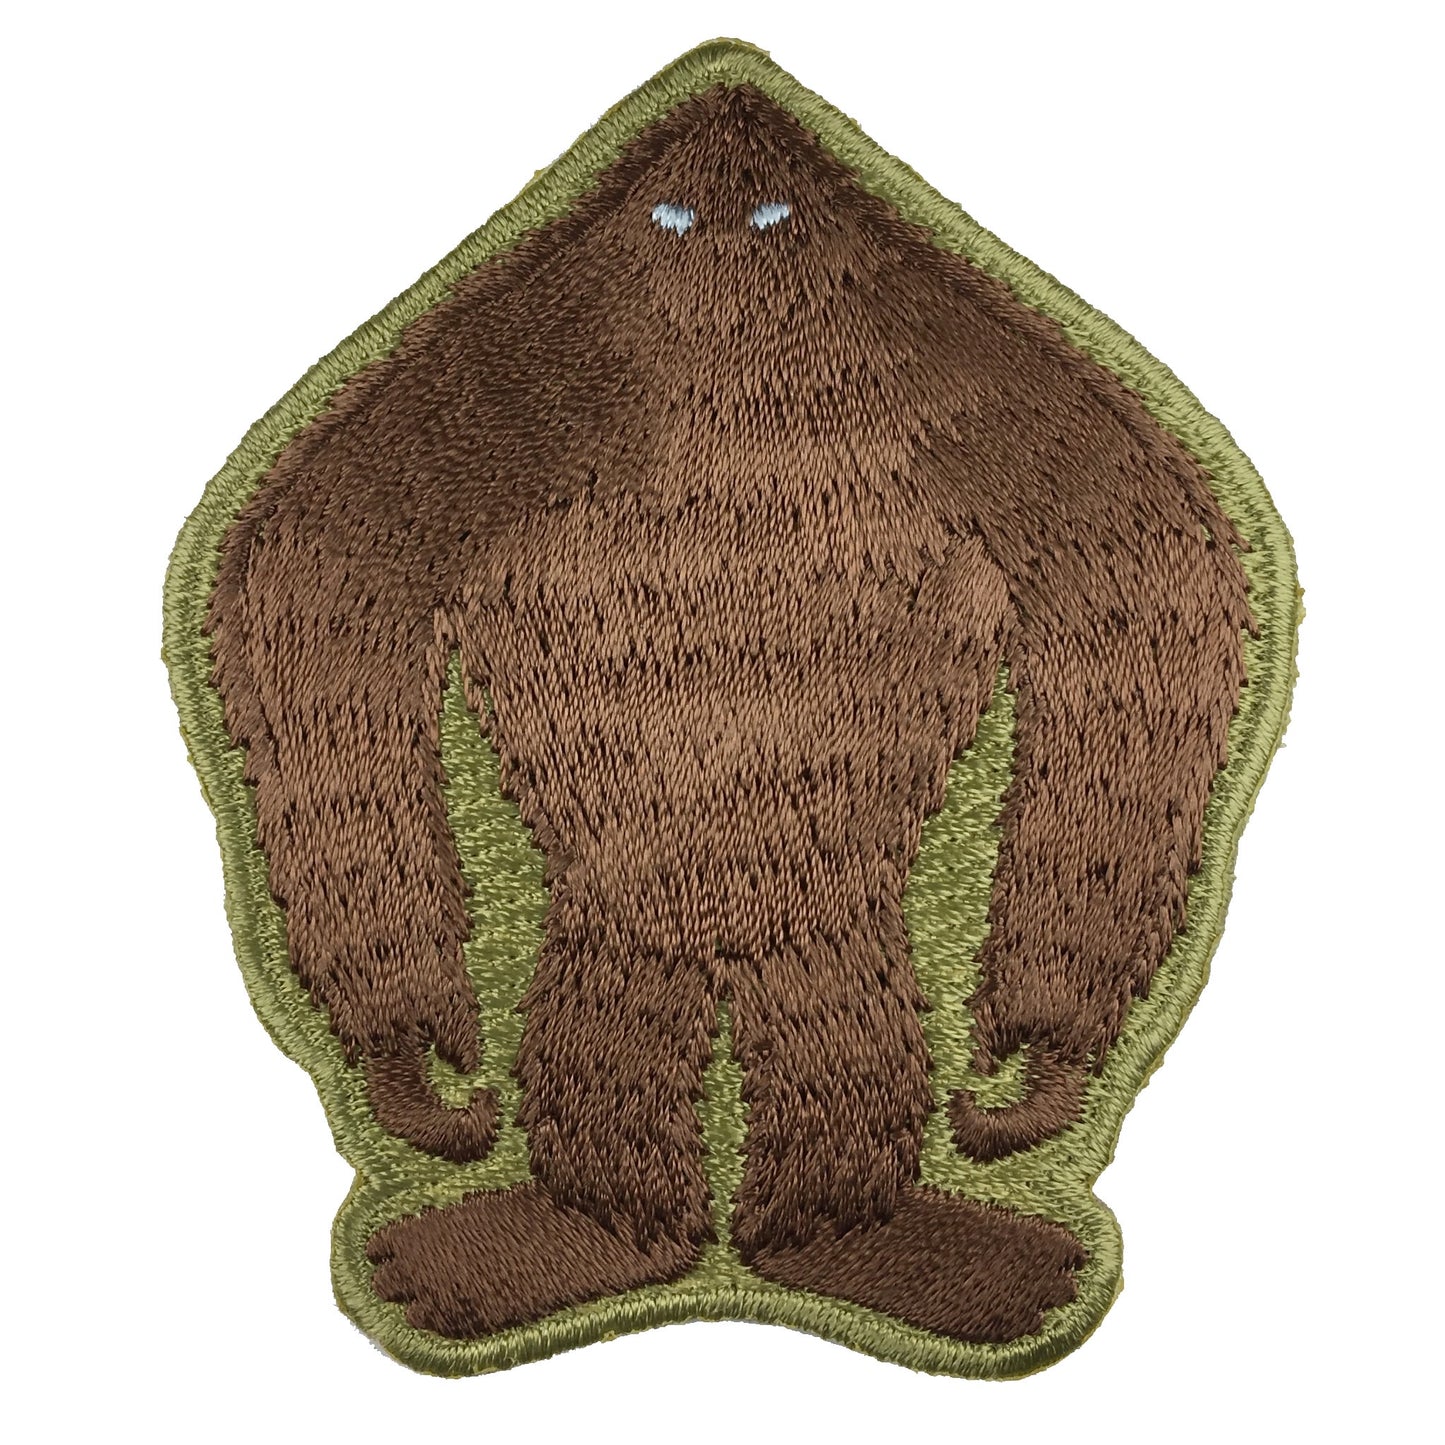 Sasquatch Cryptid silhouette embroidered patch